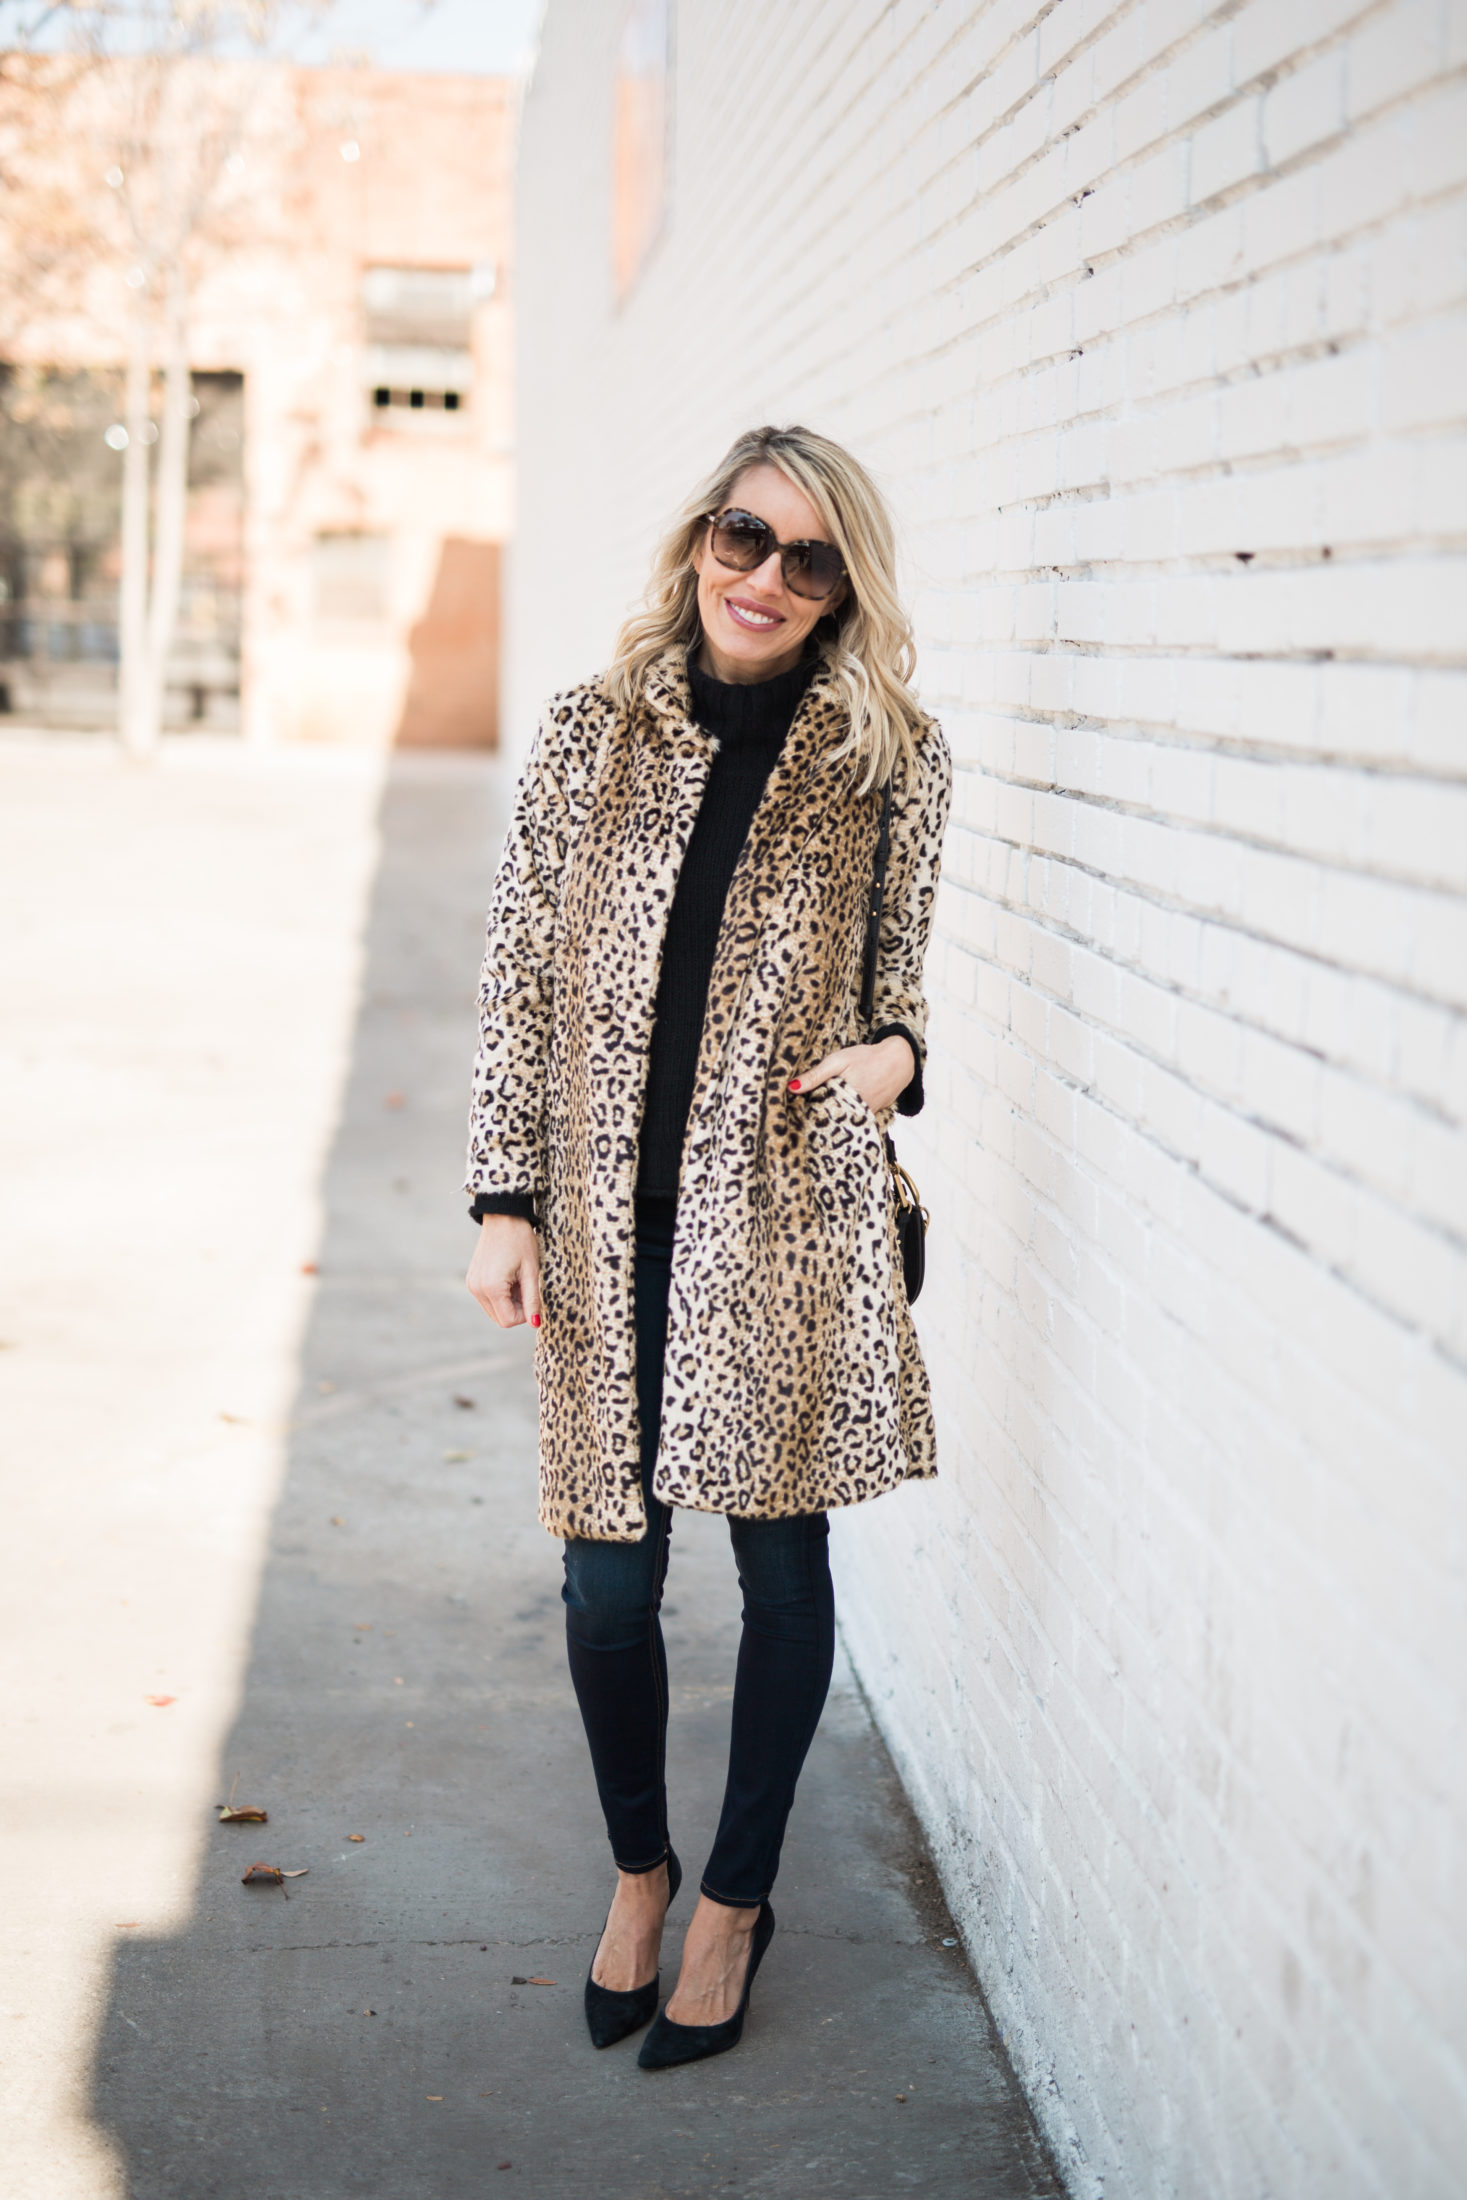 affordable faux fur coats for winter that look high end